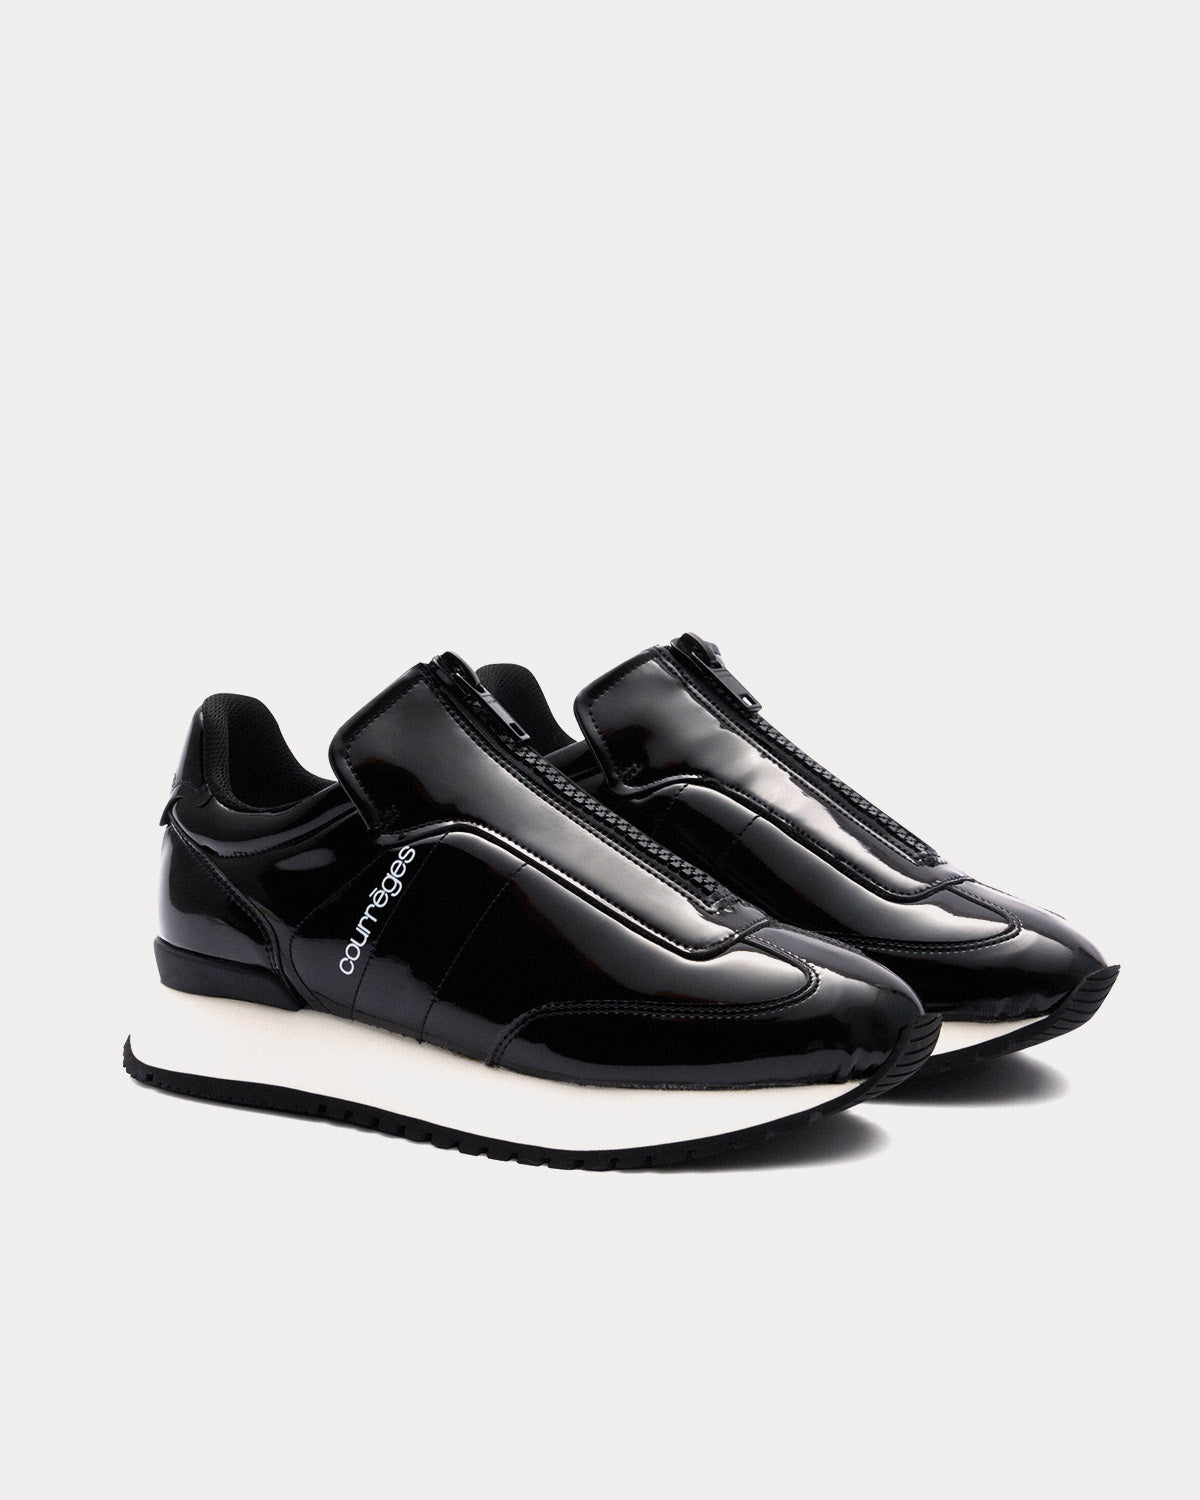 Courrèges - Zip Patent Leather Black Slip On Sneakers